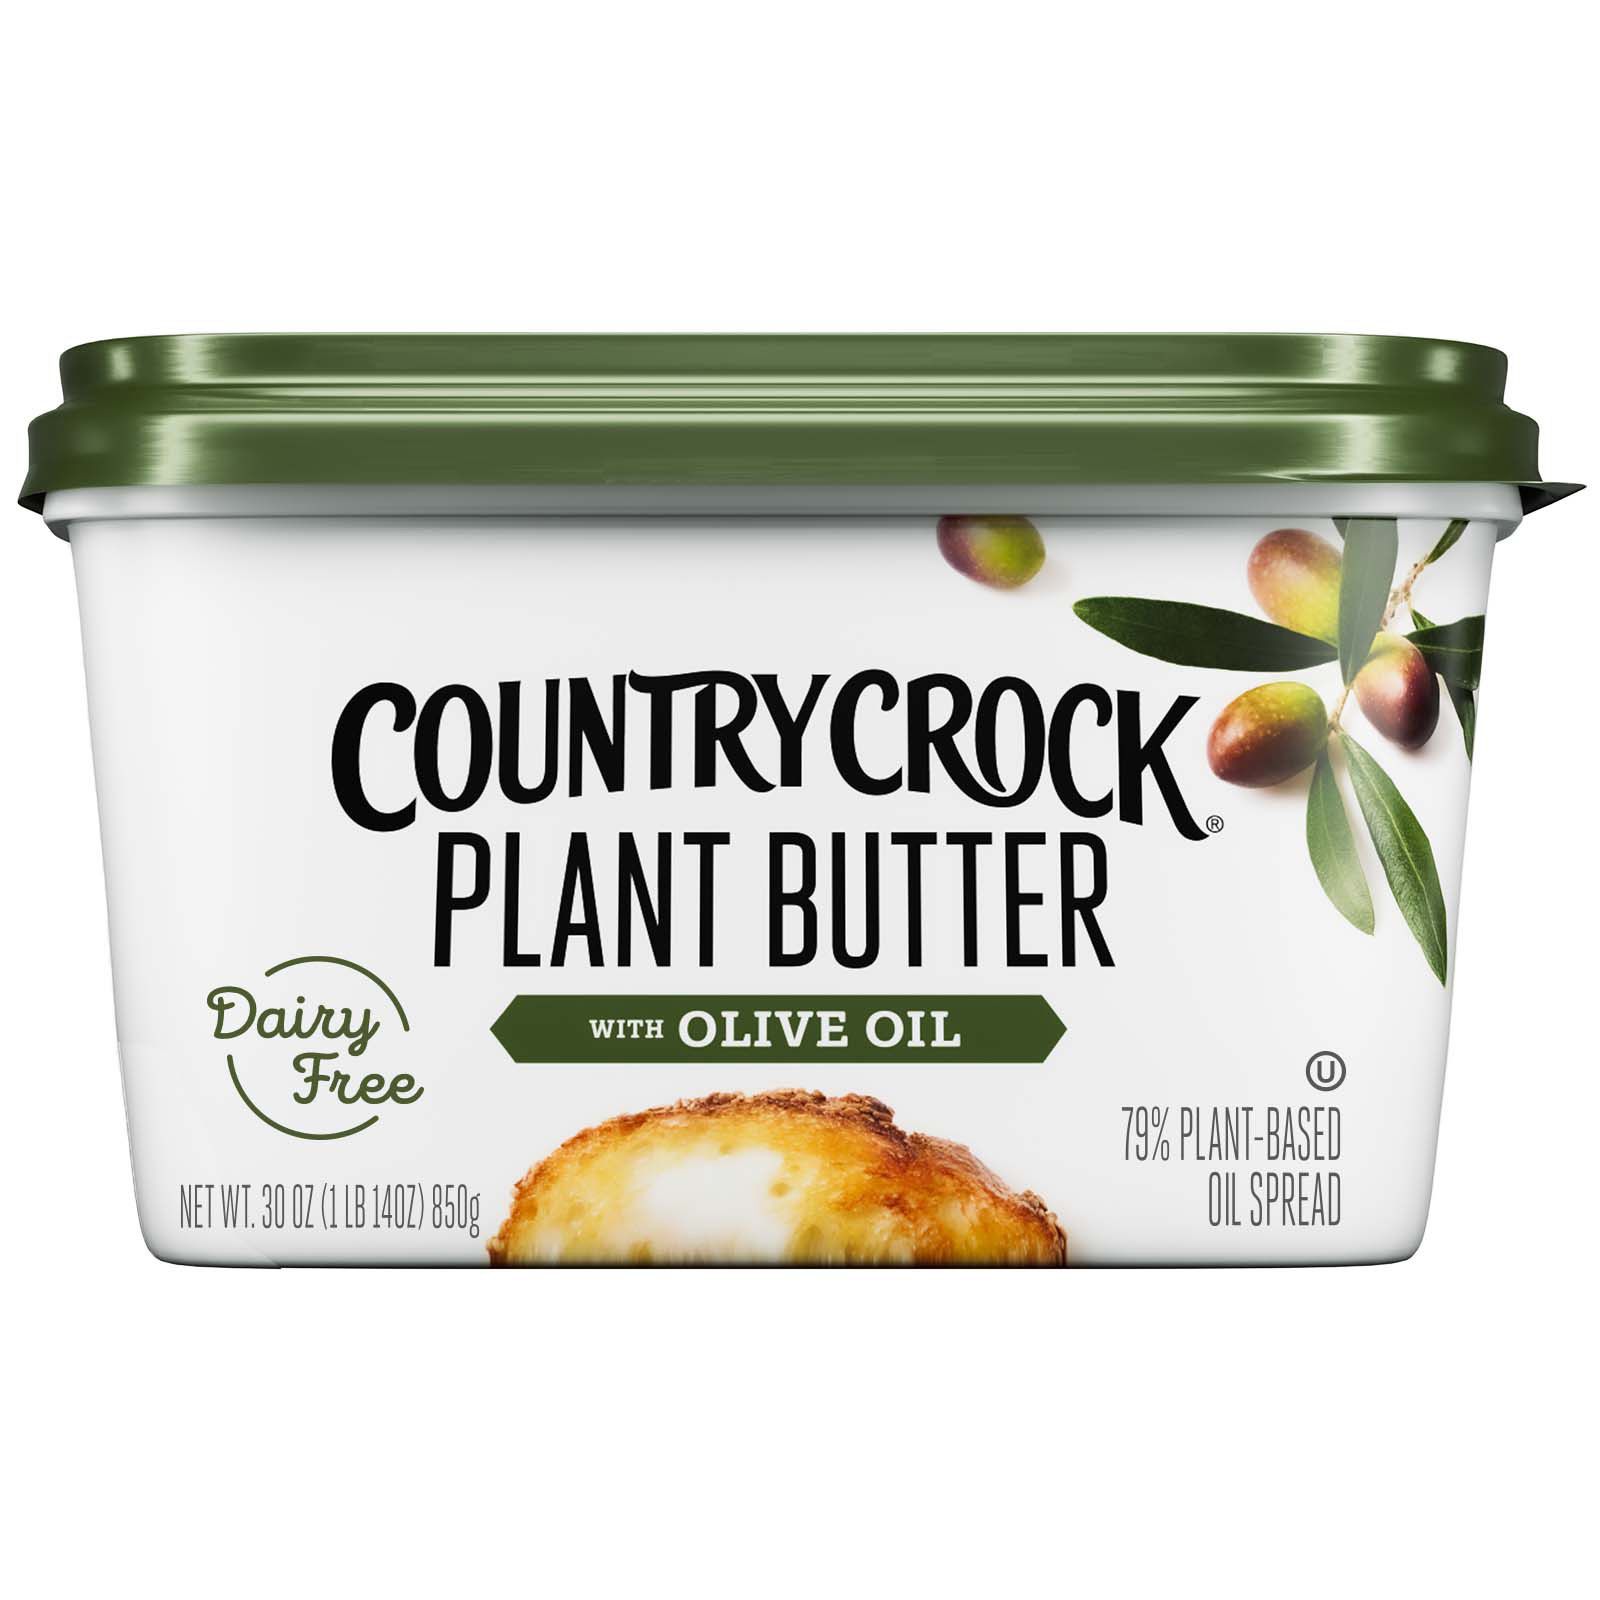 Country Crock Plant Butter Olive Oil, 30 oz.